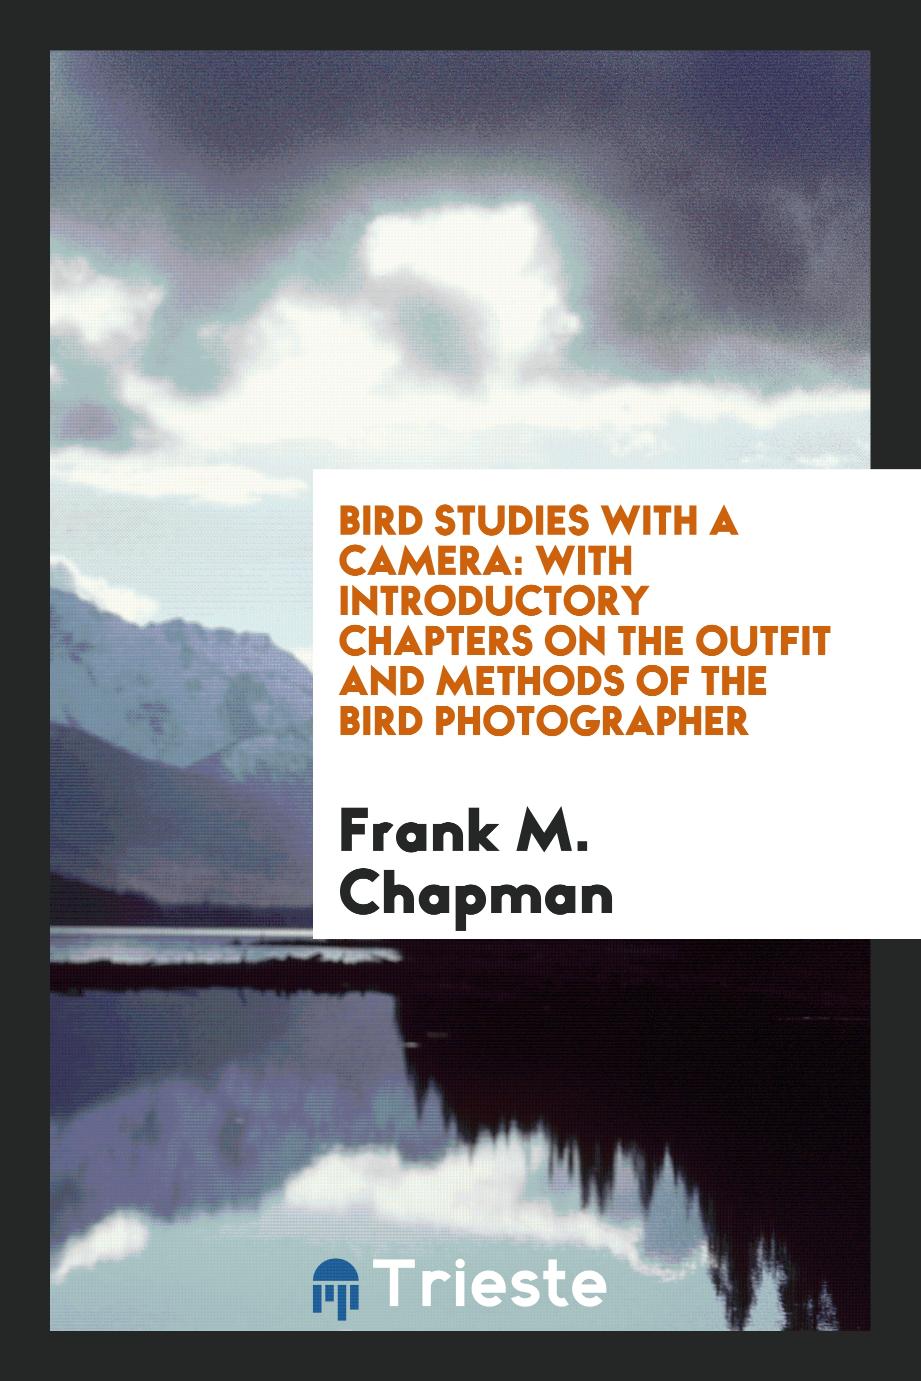 Bird studies with a camera: with introductory chapters on the outfit and methods of the bird photographer